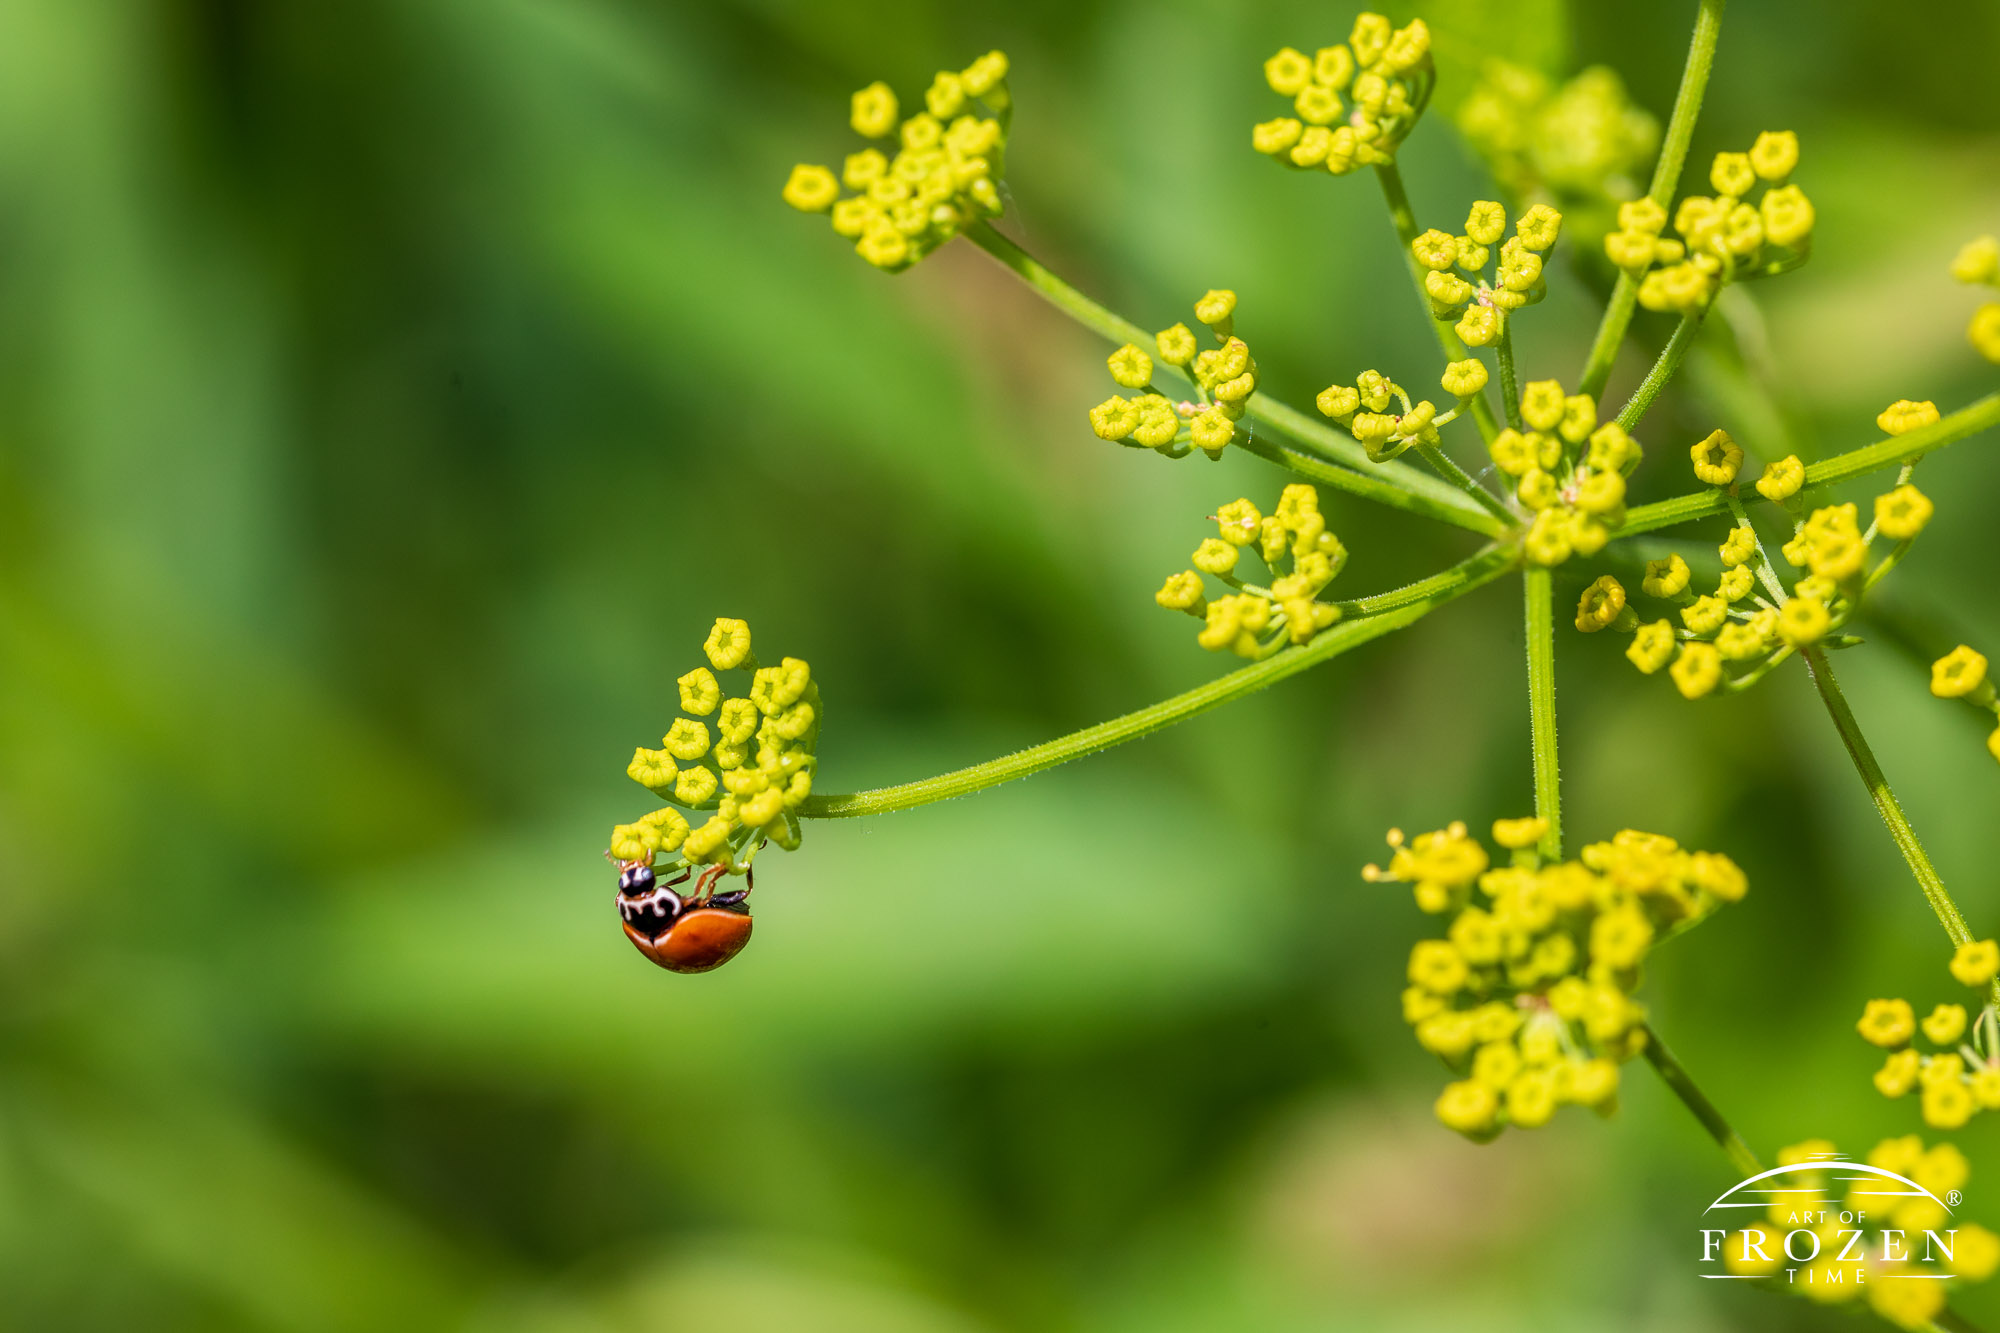 A macro view of a polished ladybug hanging from the yellow flower cluster of a fennel plant